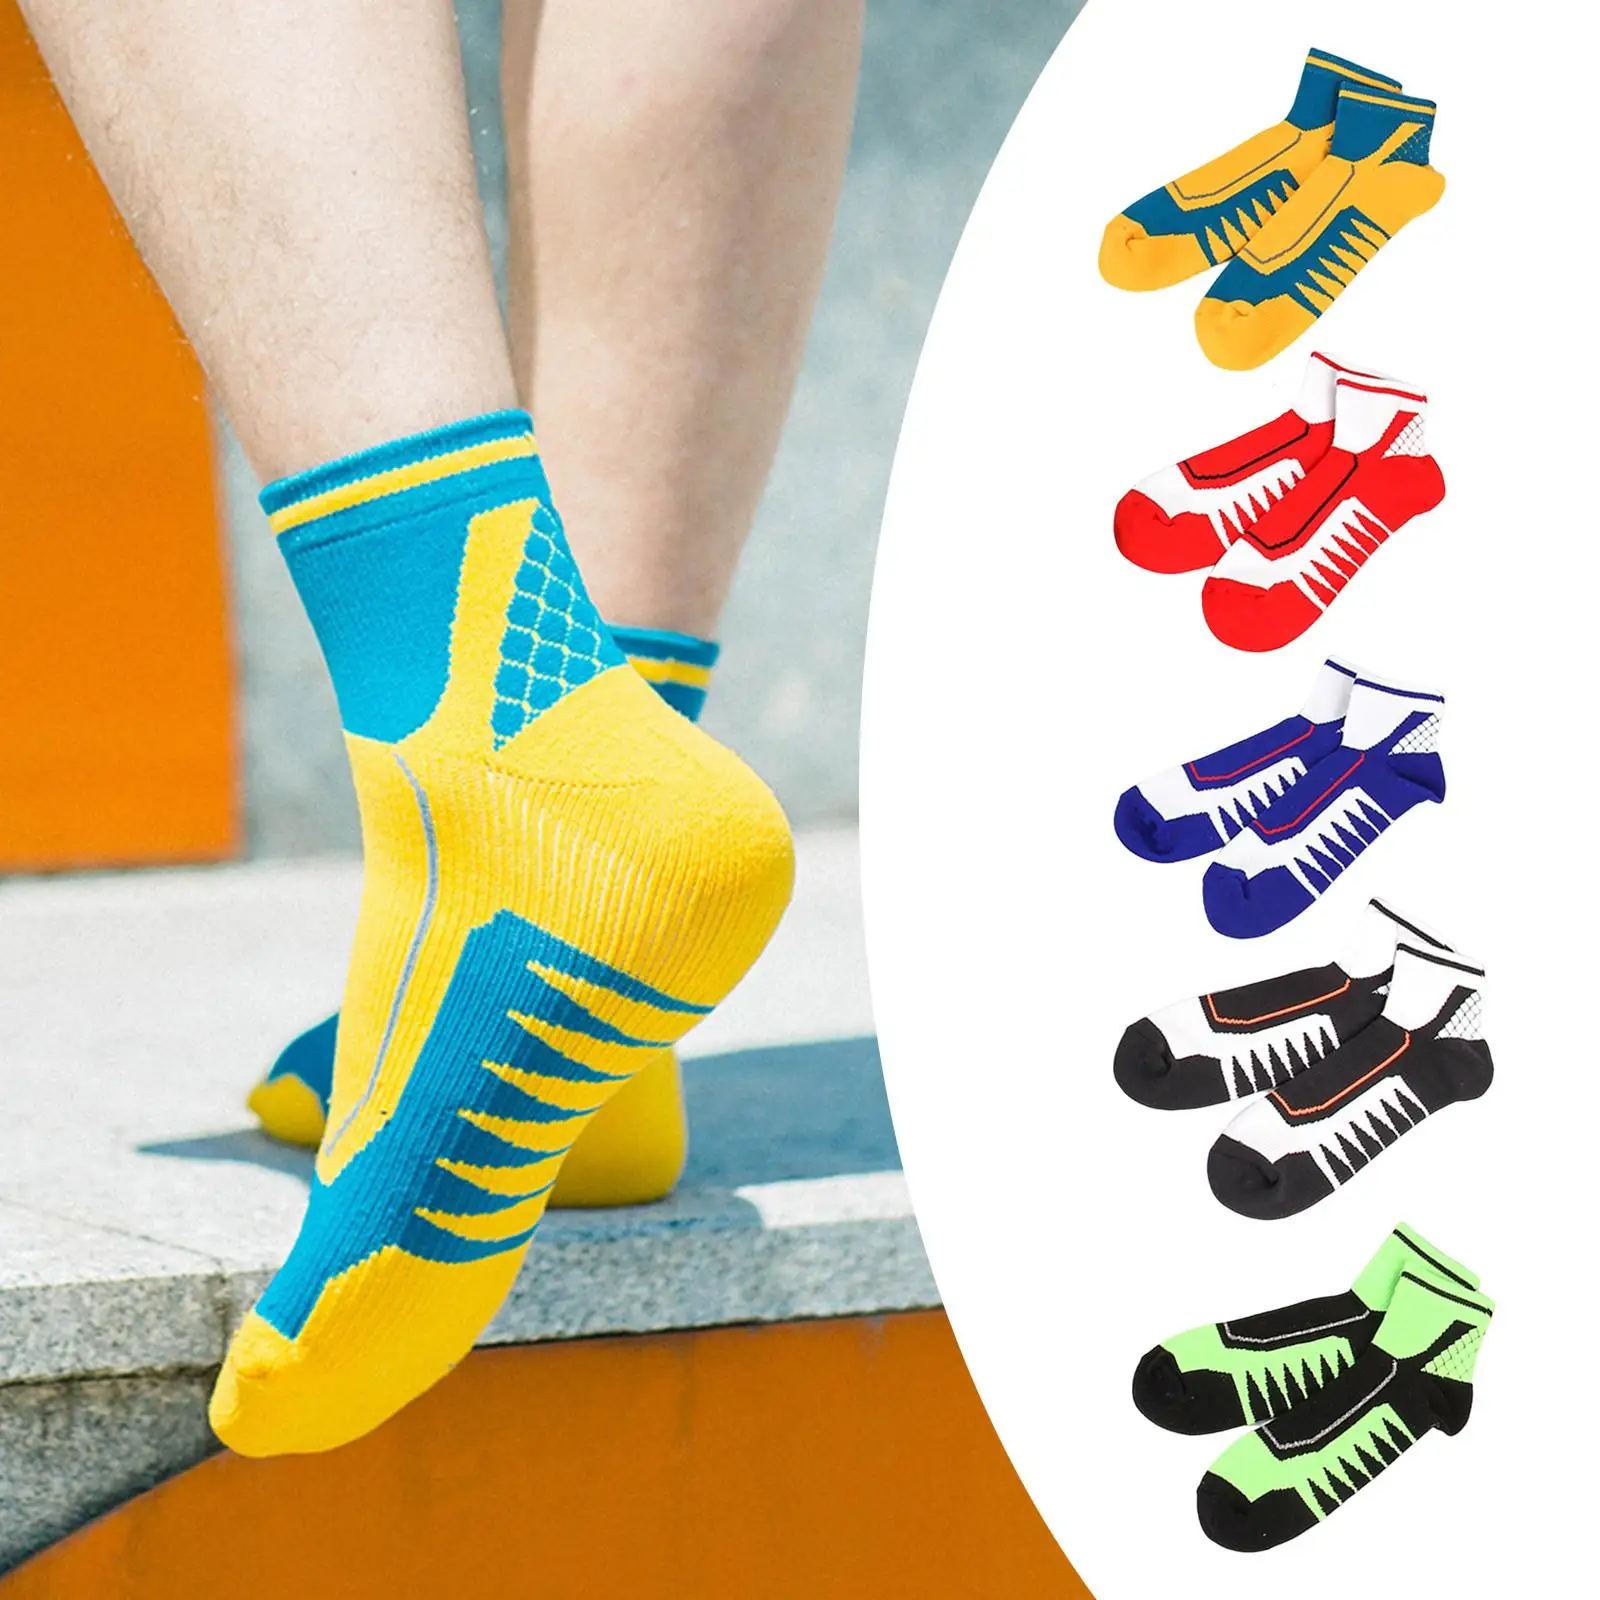 Fashion 5 Pairs Men Crew Socks Trouser Casual Soft Athletic Sports Ankle Socks for Home Bedroom Indoor Outdoor Hiking Basketball